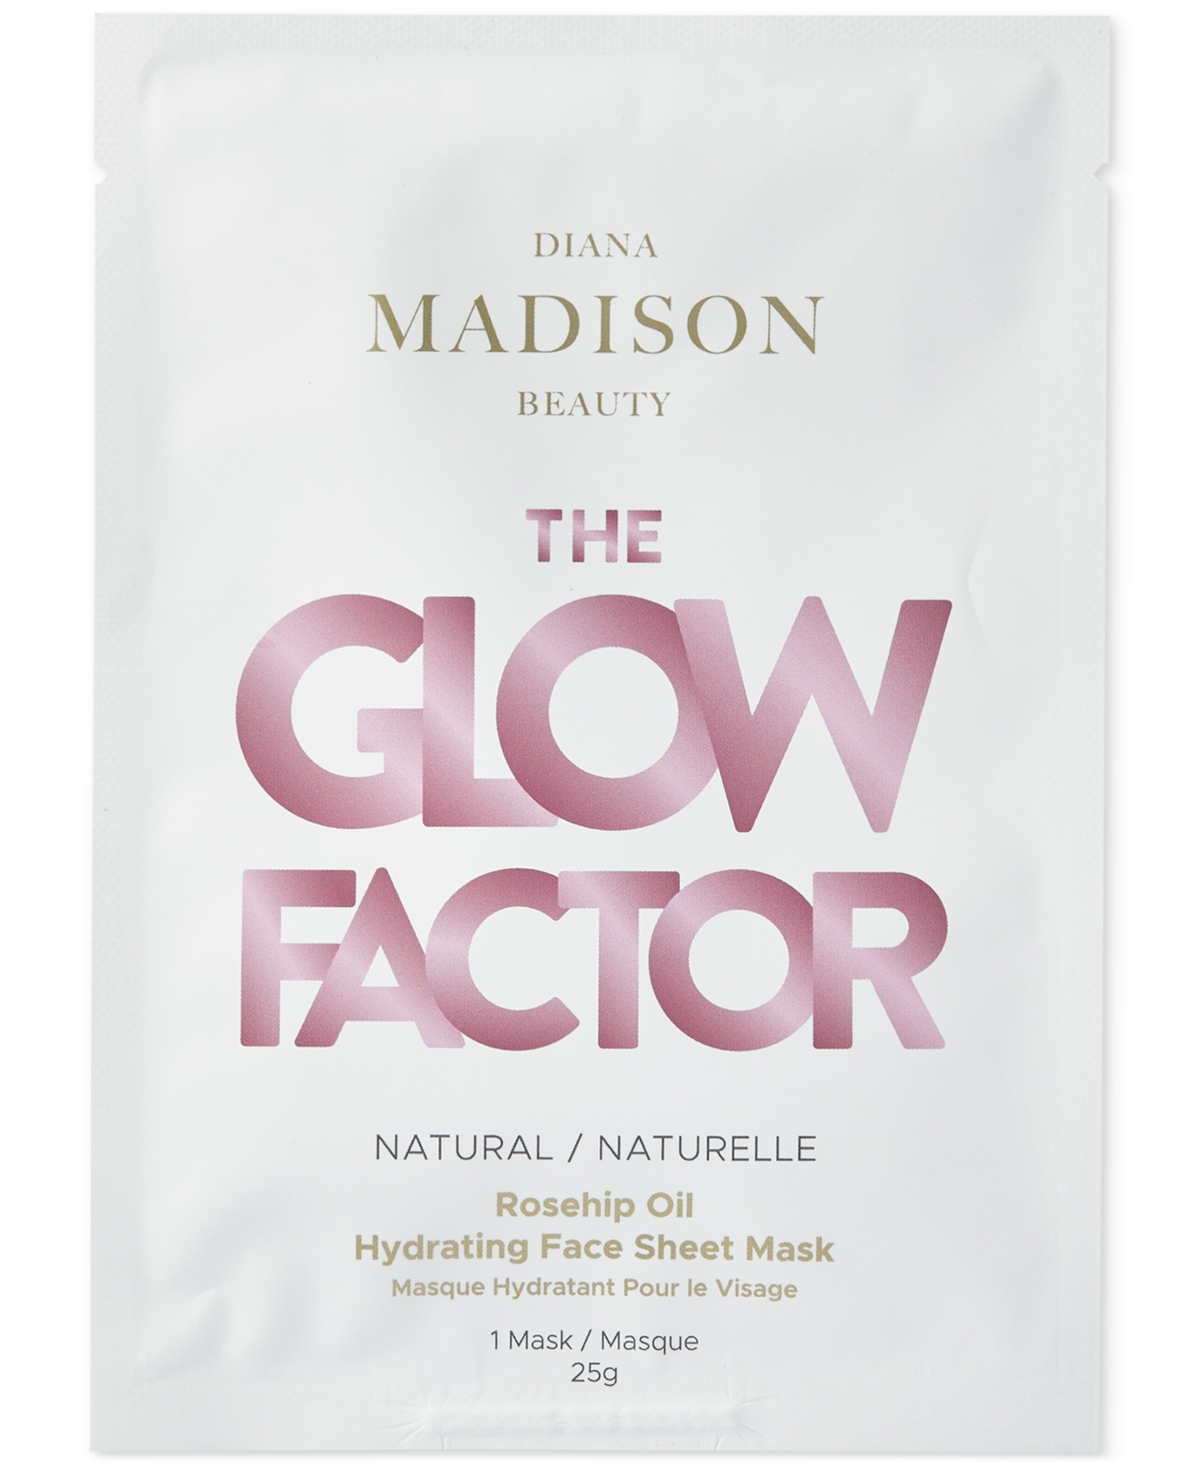 Diana Madison Beauty The Glow Factor Rosehip Seed Oil Hydrating Face Sheet Mask